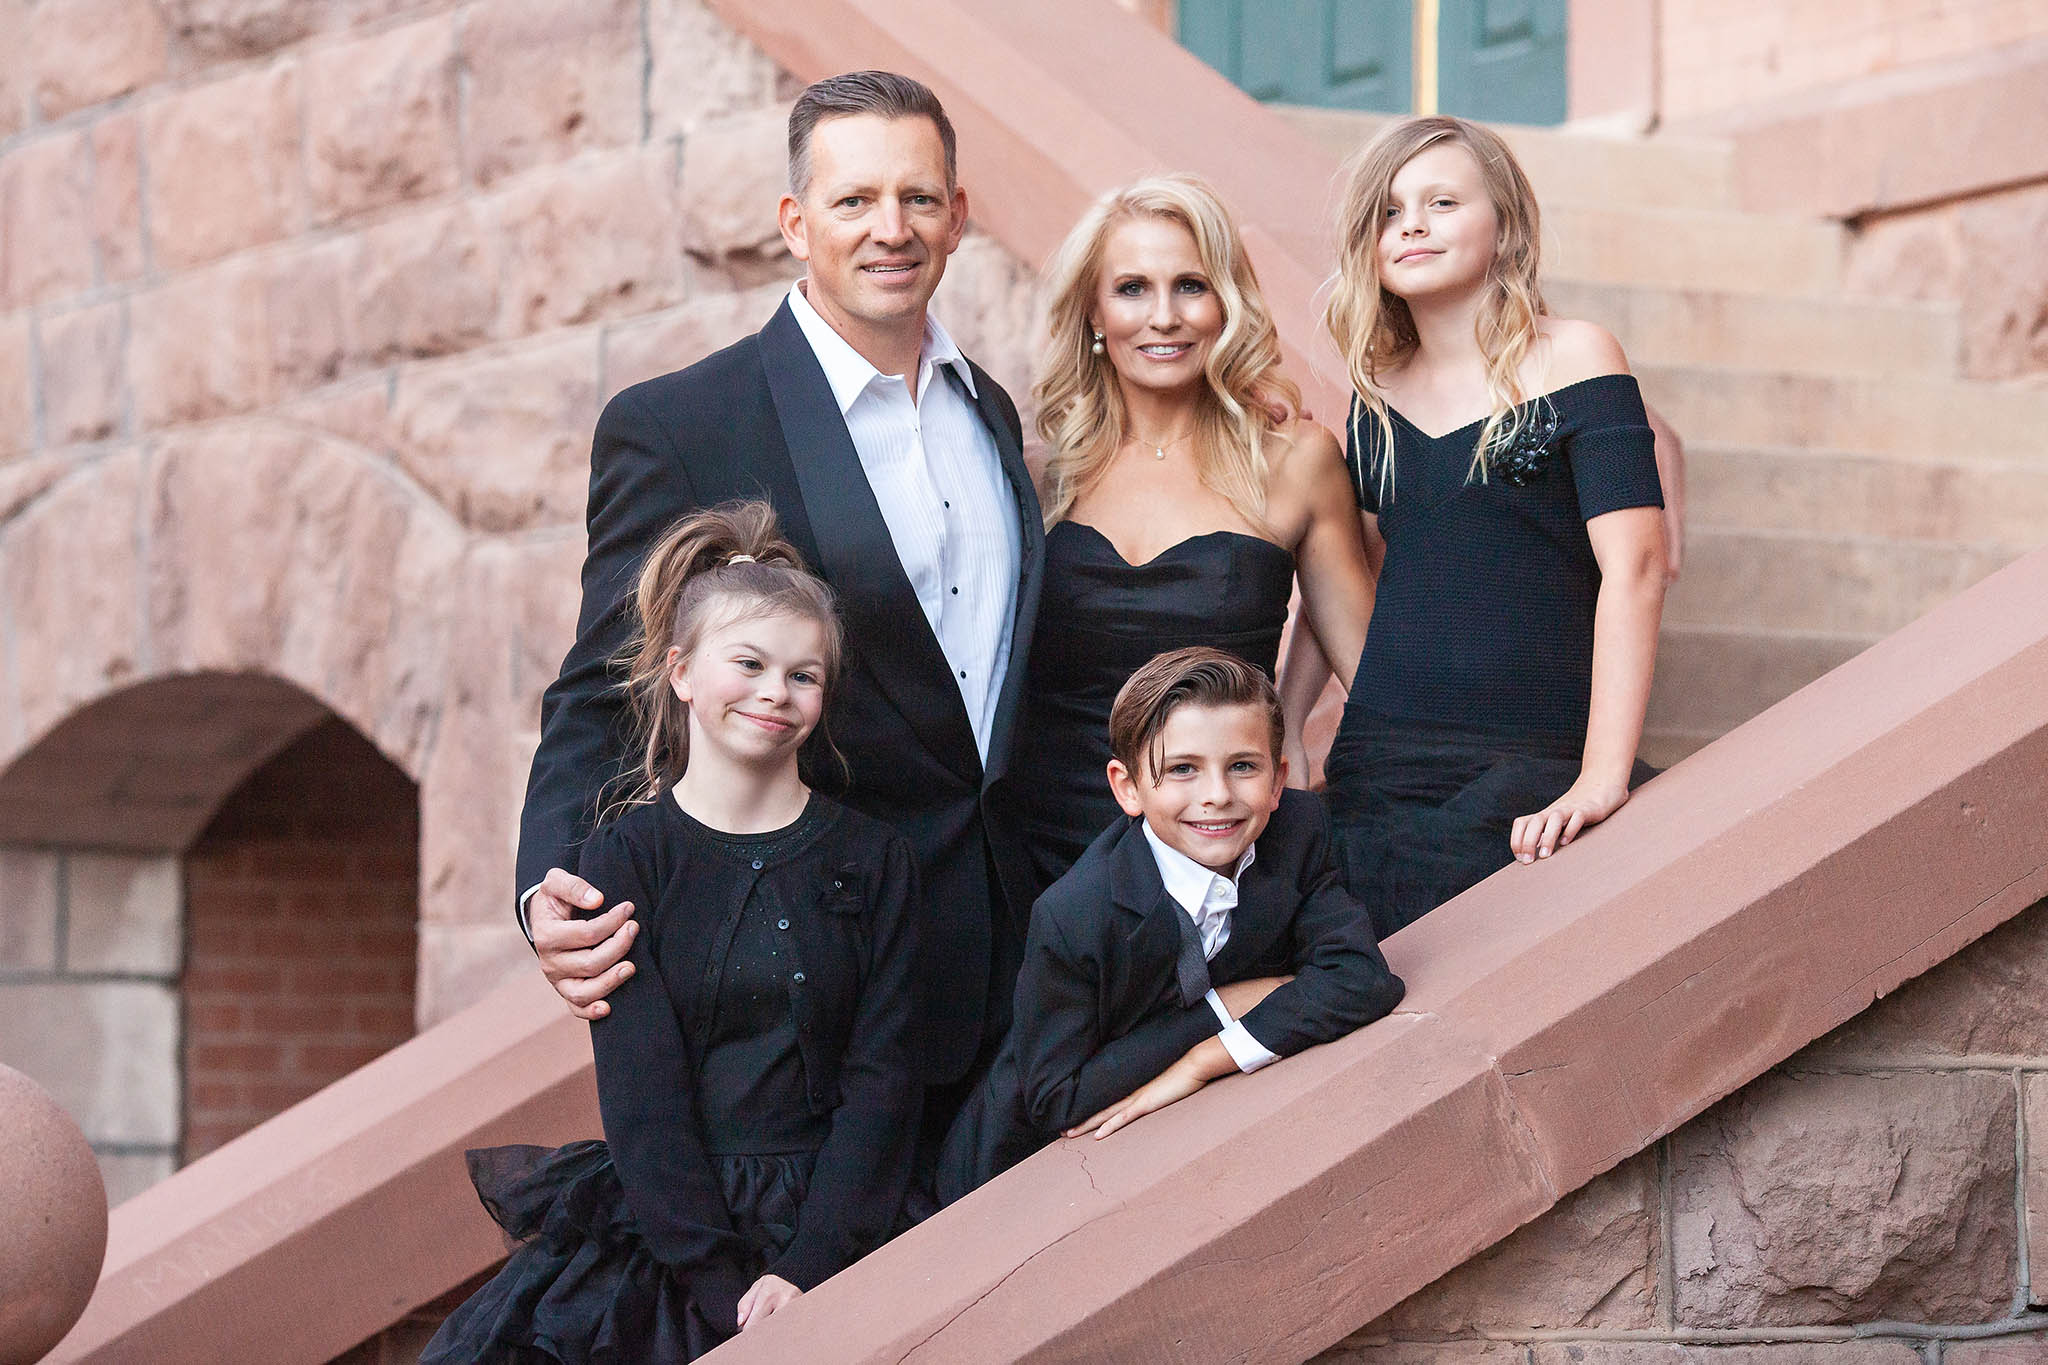 Family pictures at Arizona State University